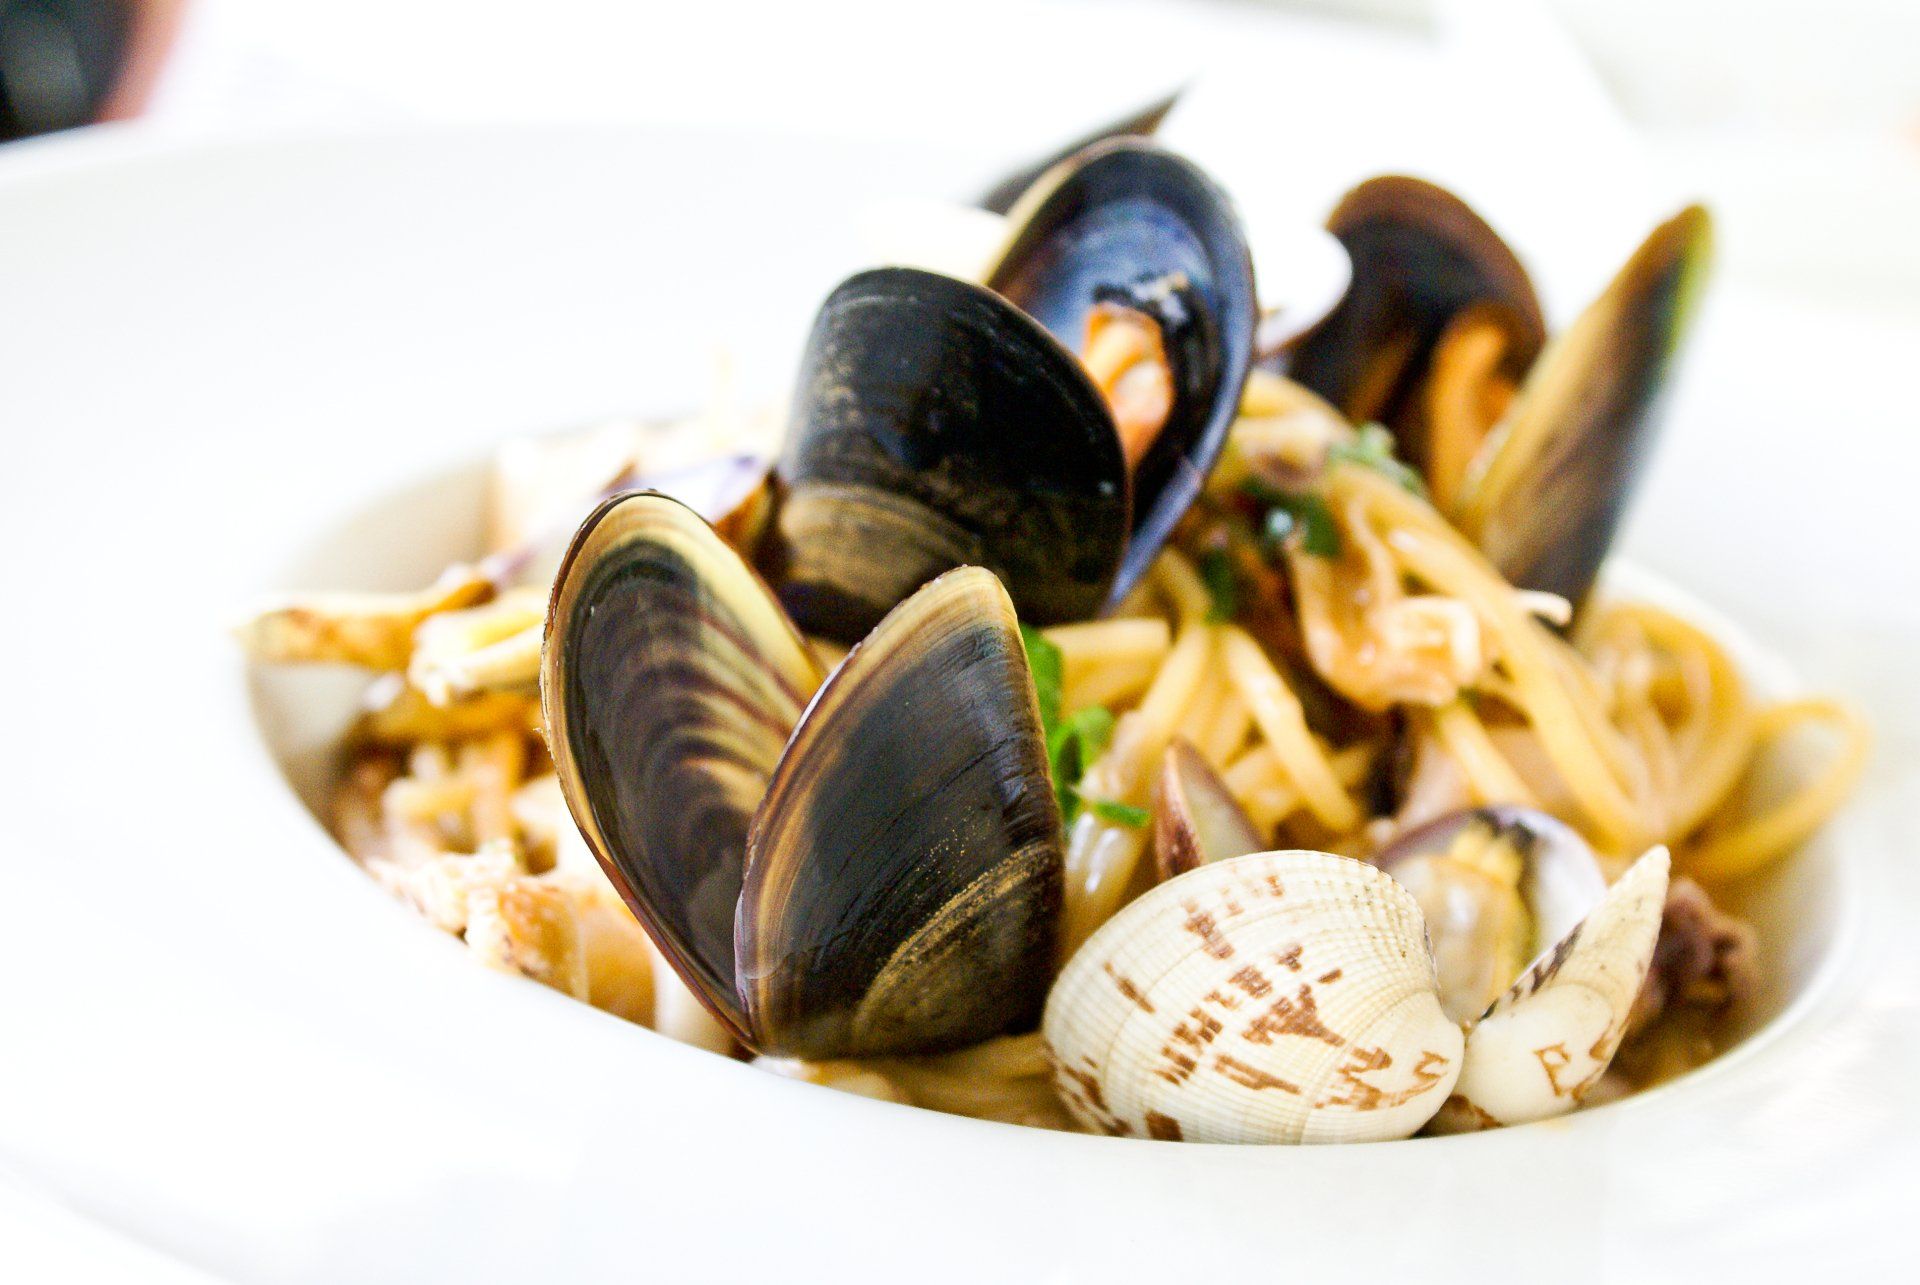 A close up of a plate of food with mussels and noodles